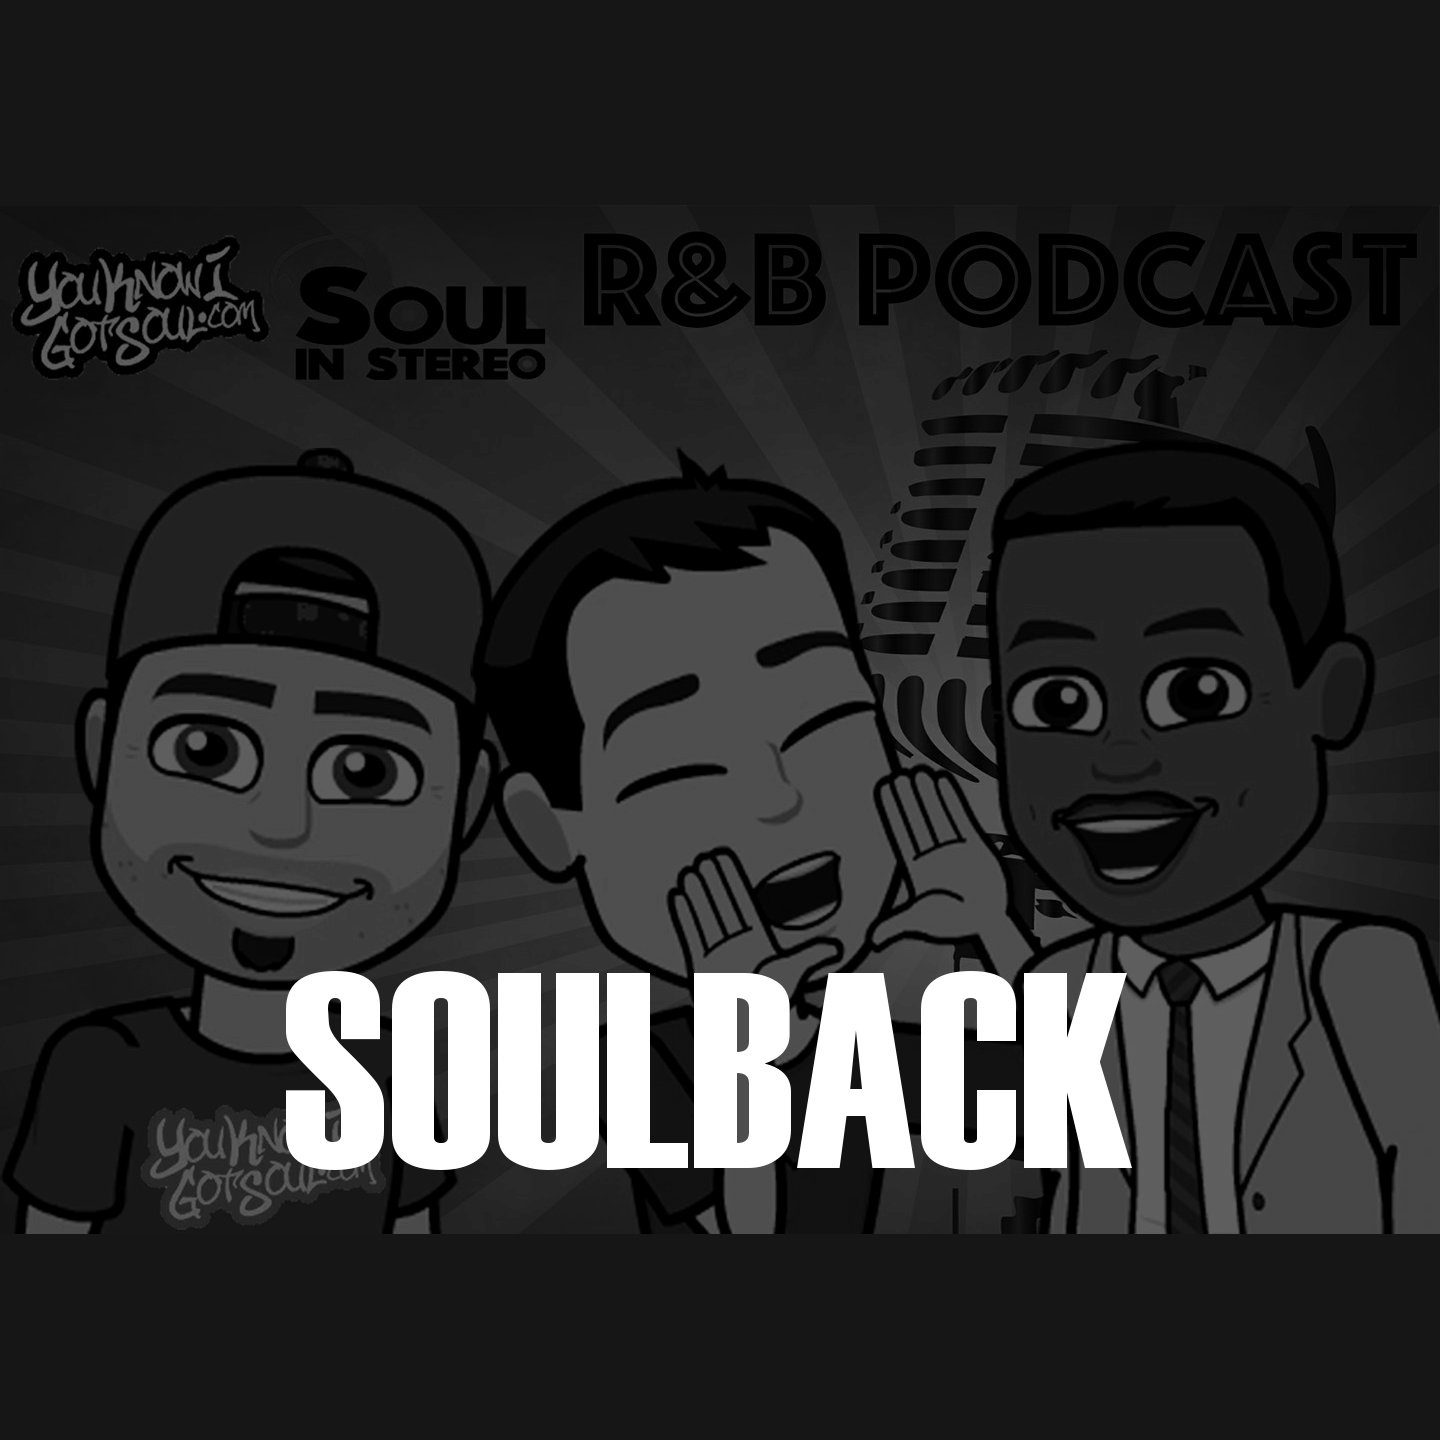 SoulBack (featuring Nobody) – The R&B Podcast Episode 14